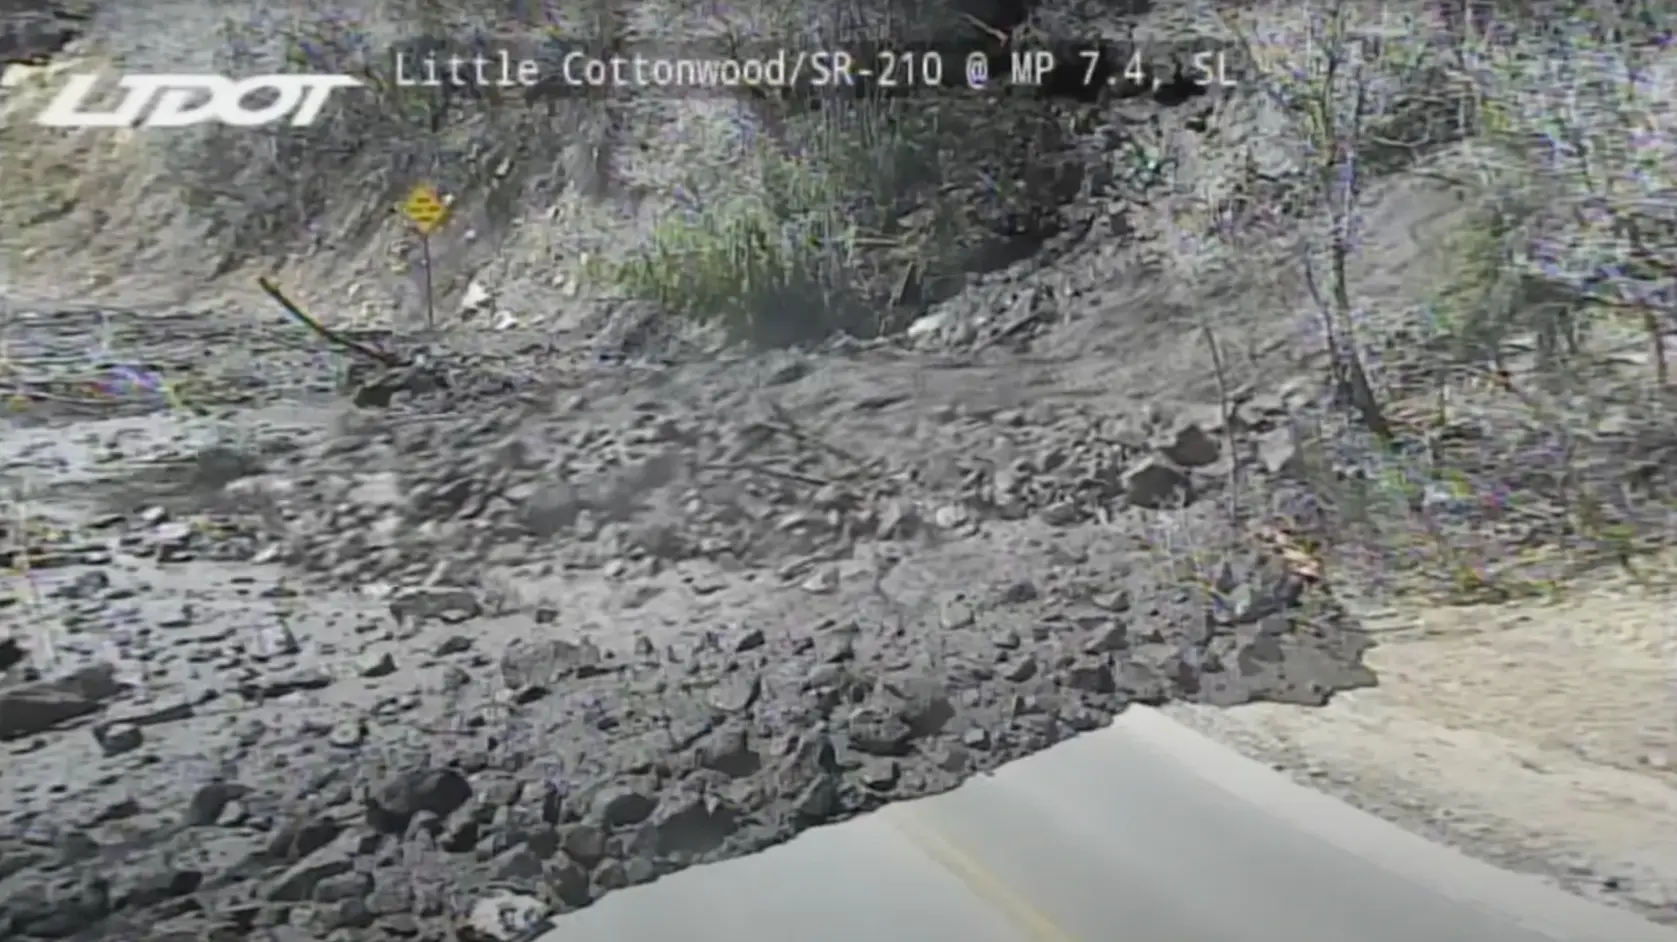 Screenshot from the UDOT video feed showing a mudslide crossing Little Cottonwood Canyon road